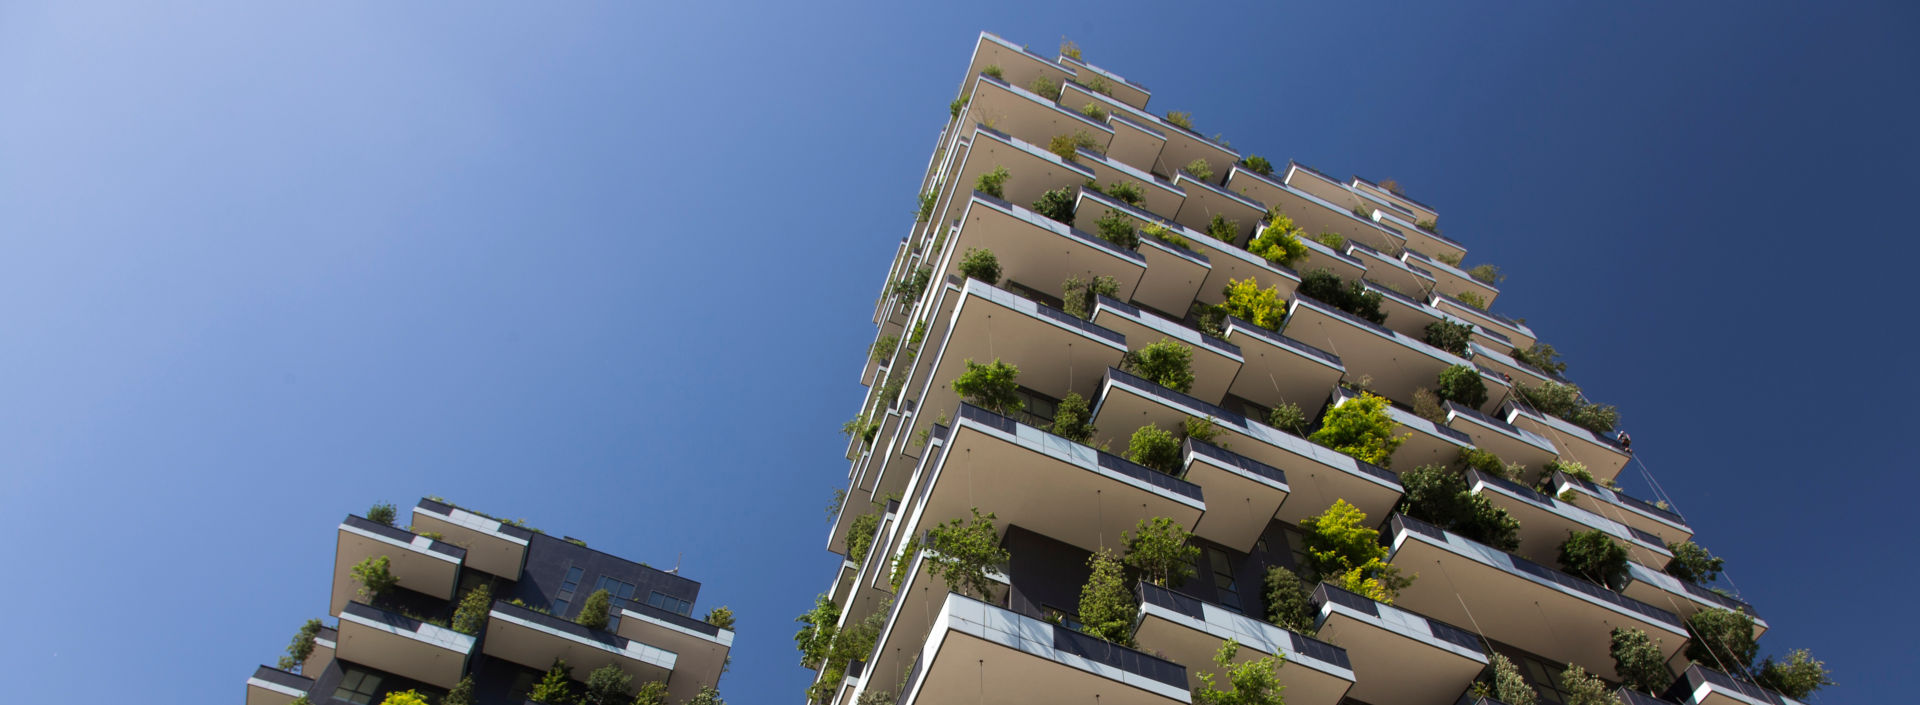 Two residential towers with facades covered with plants and trees.